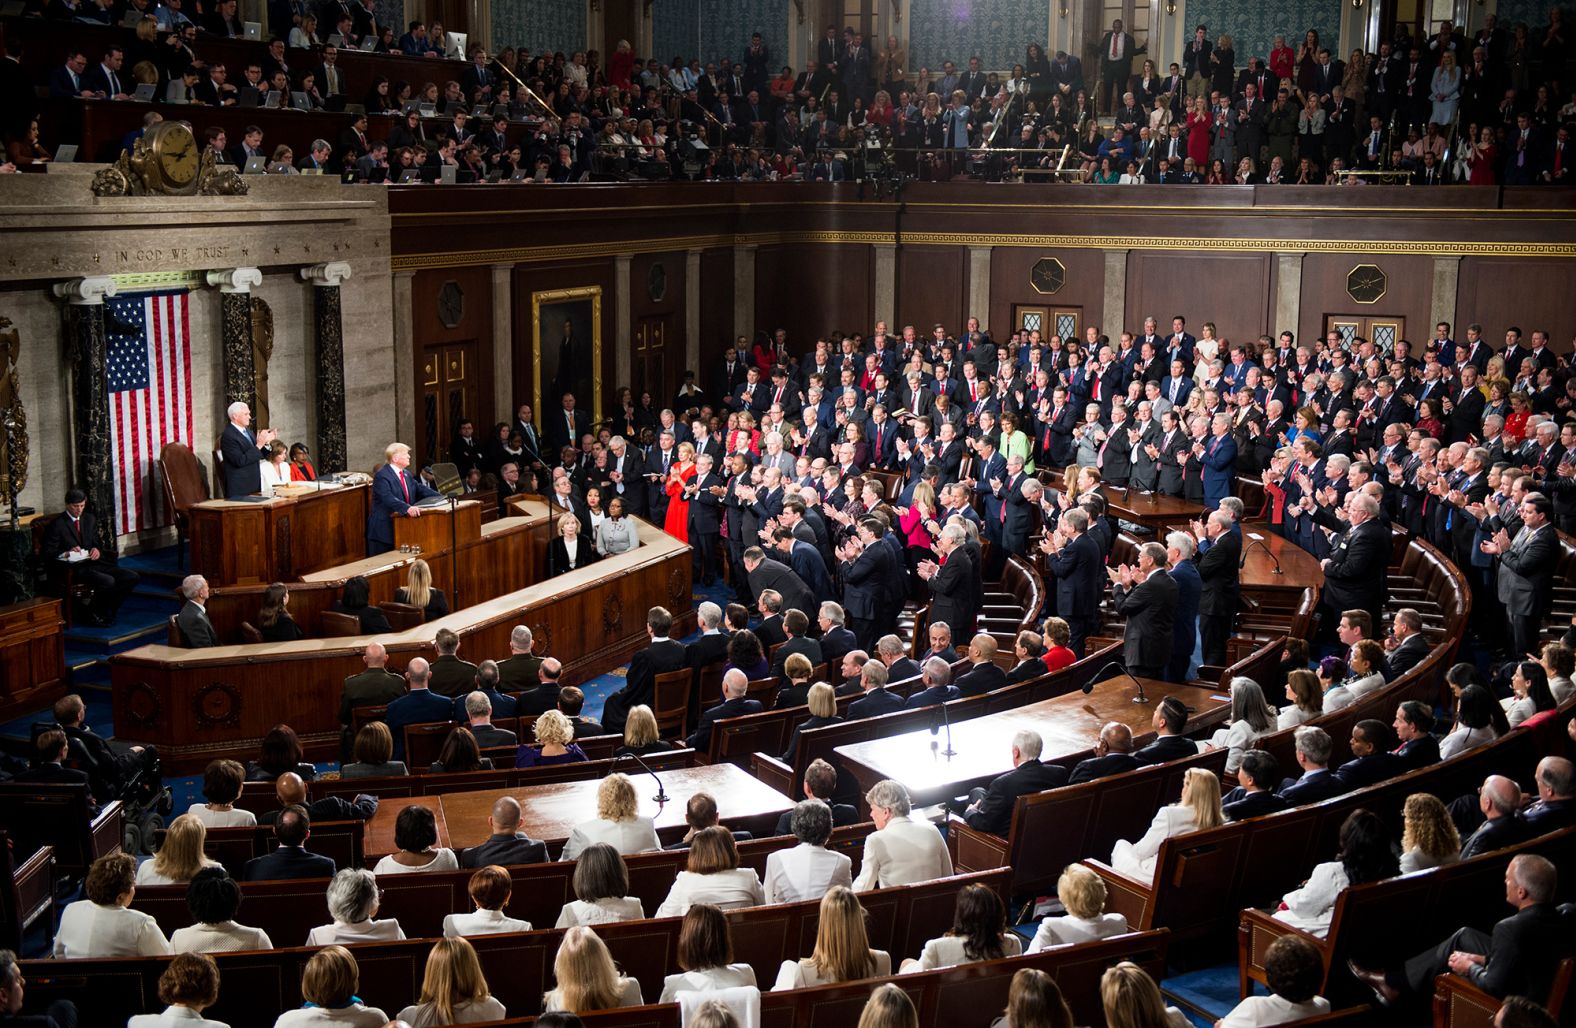 Republicans rise to applaud the President while Democrats stay seated.